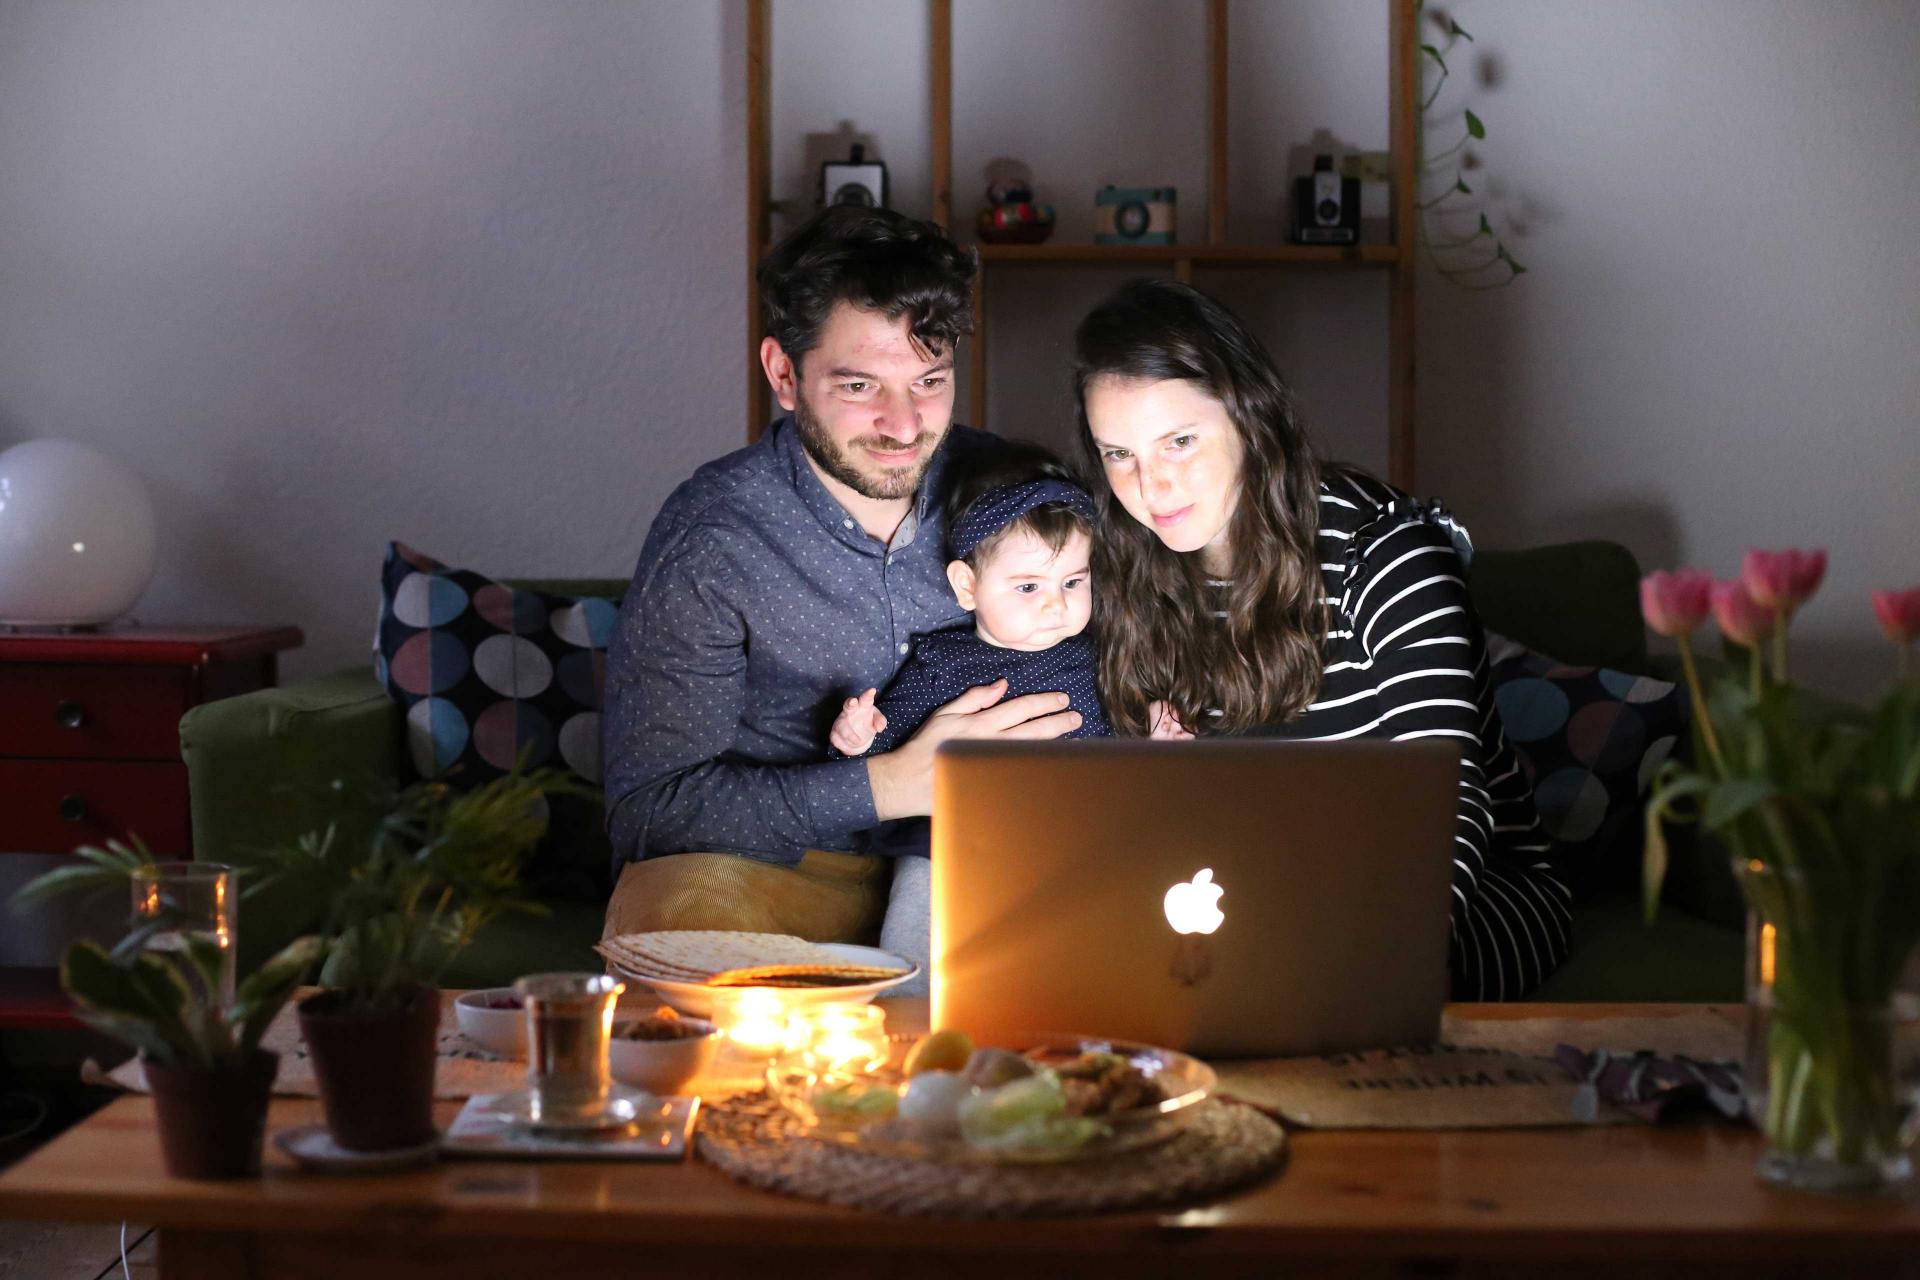 A man, a child and a woman sitting in front of a laptop